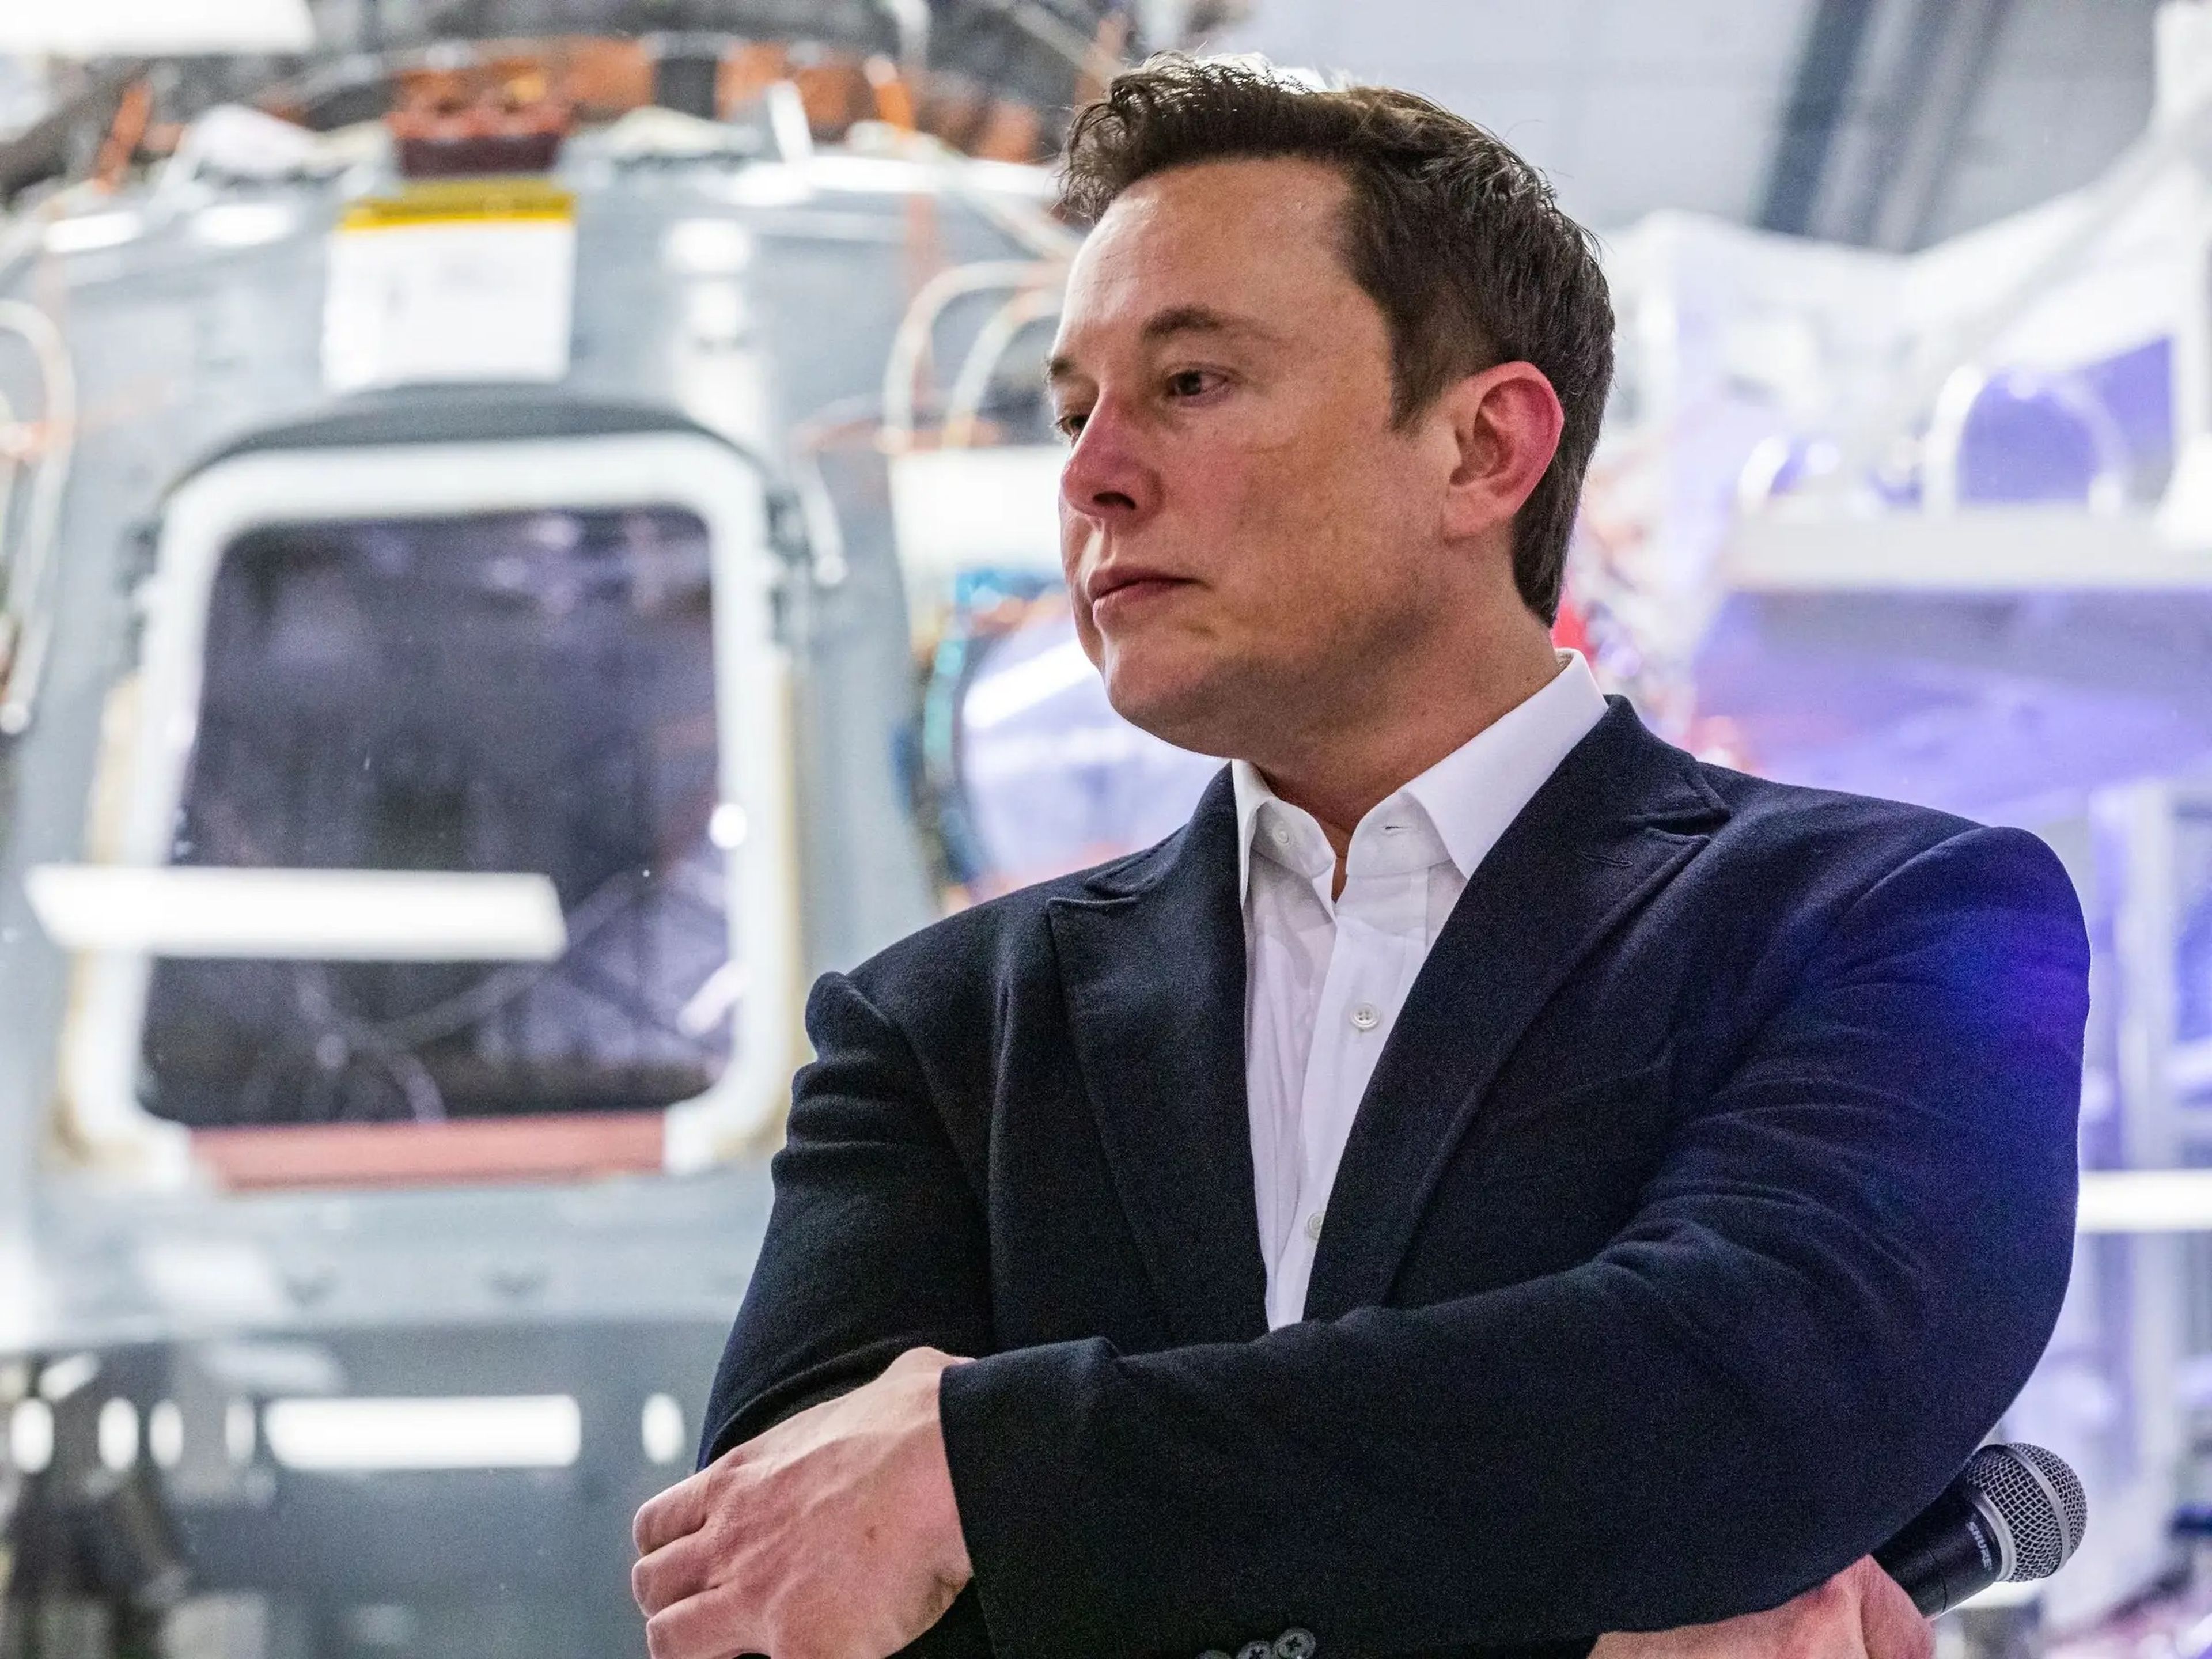 SpaceX founder Elon Musk at the company's HQ in Hawthorne, California on October 10, 2019.